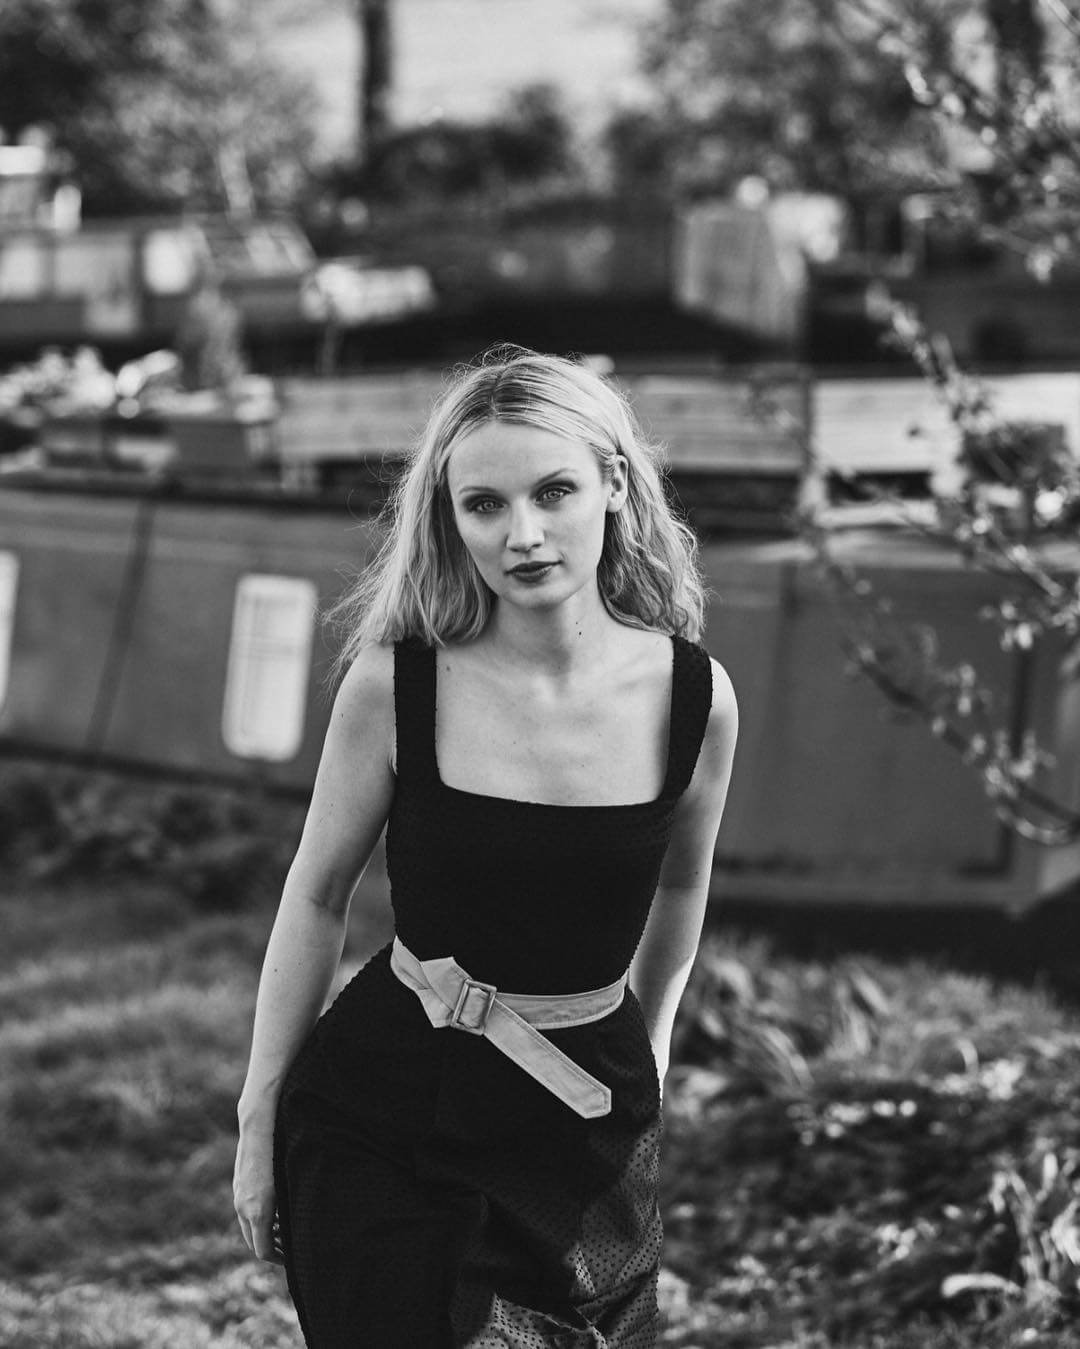 49 Hot Pictures Of Emily Berrington Are Delight For Fans | Best Of Comic Books